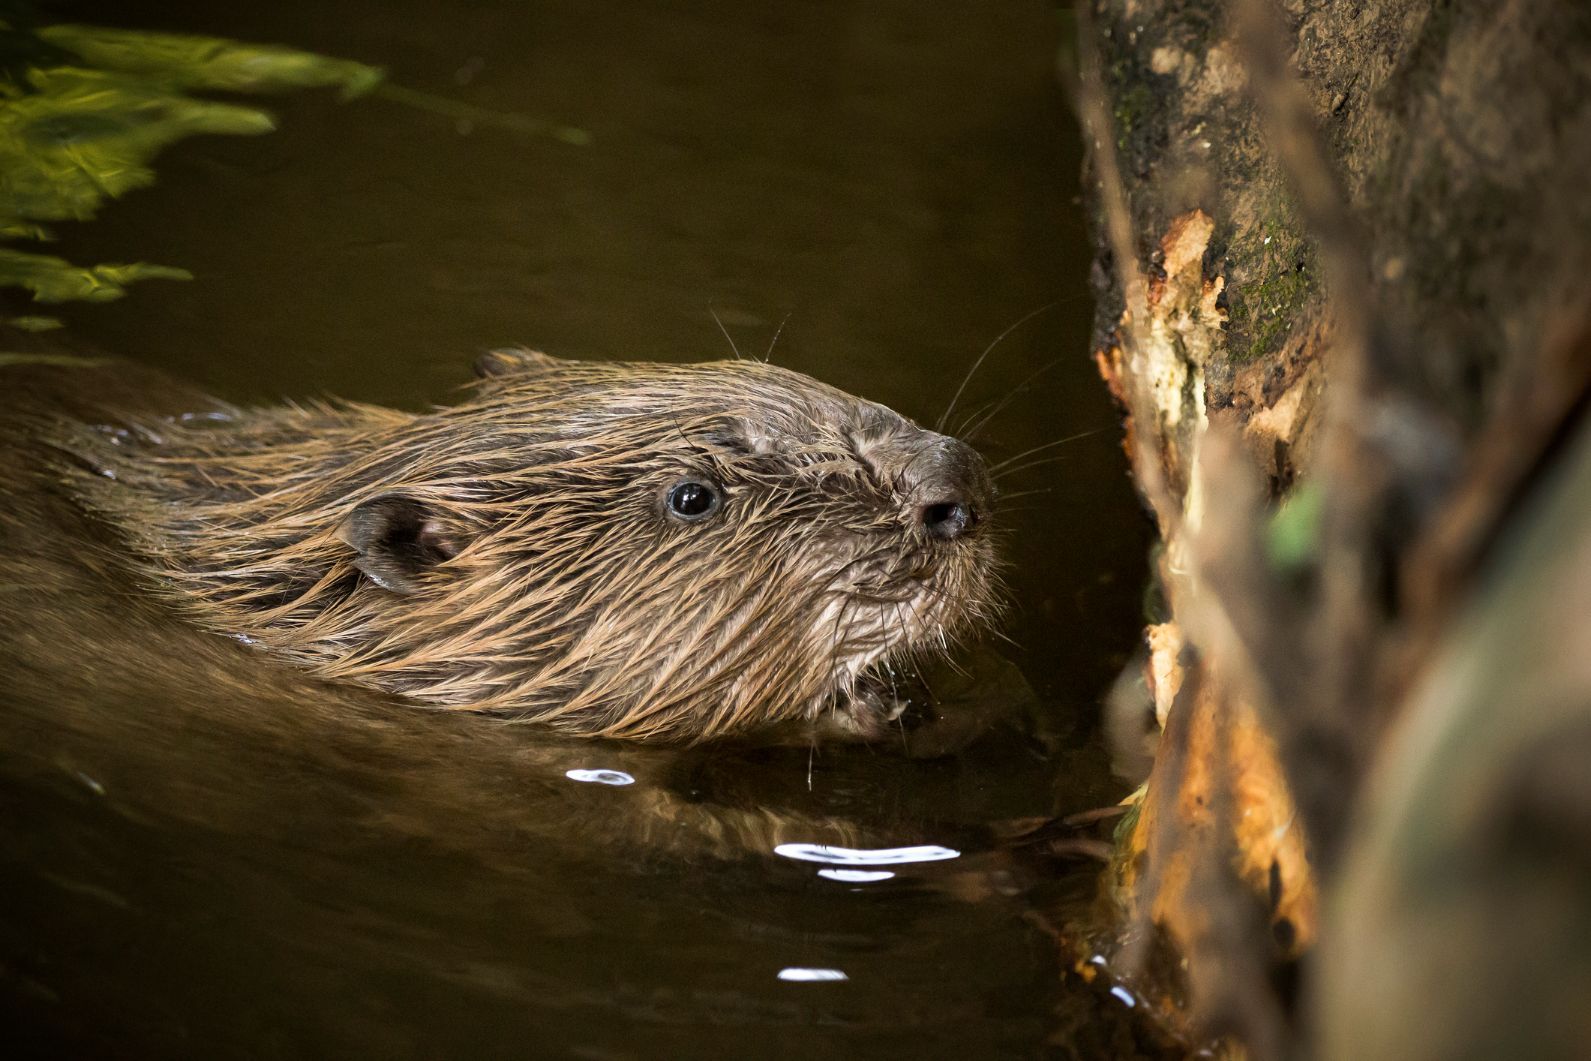 As well as being adorable, beavers are incredibly important for biodiversity, creating vibrant wetland landscapes. Photo: Getty